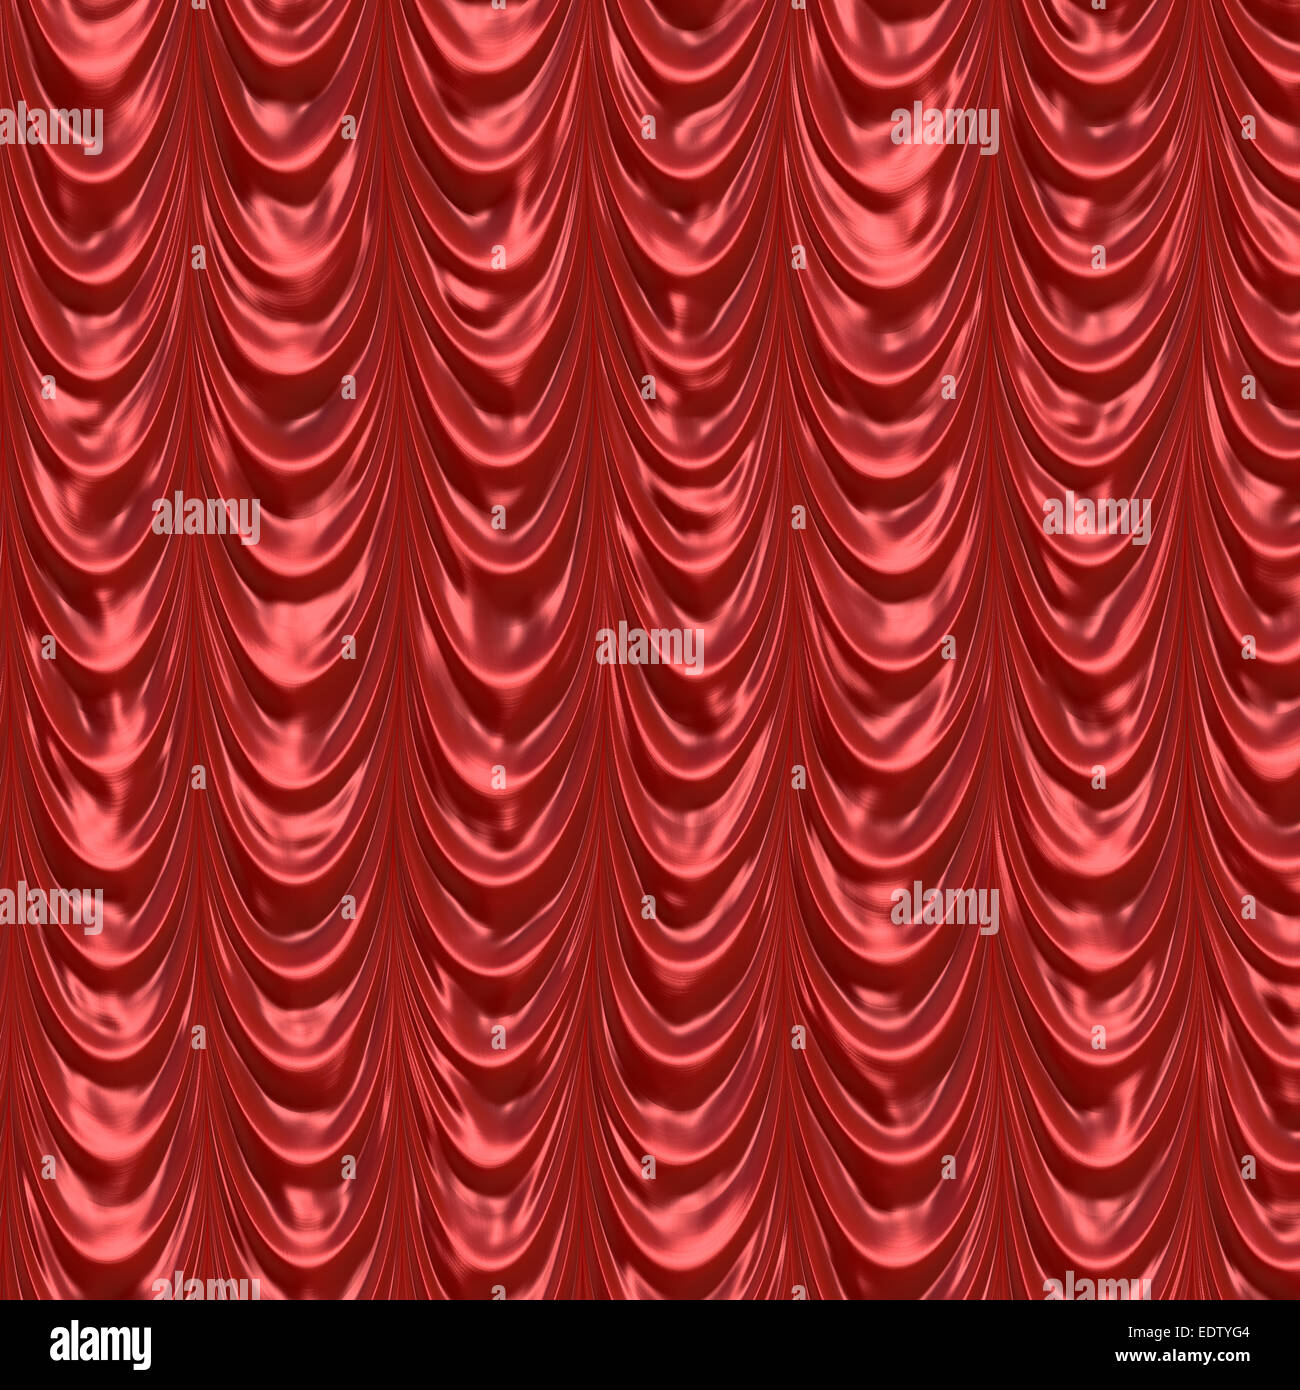 Red curtain for background Stock Photo